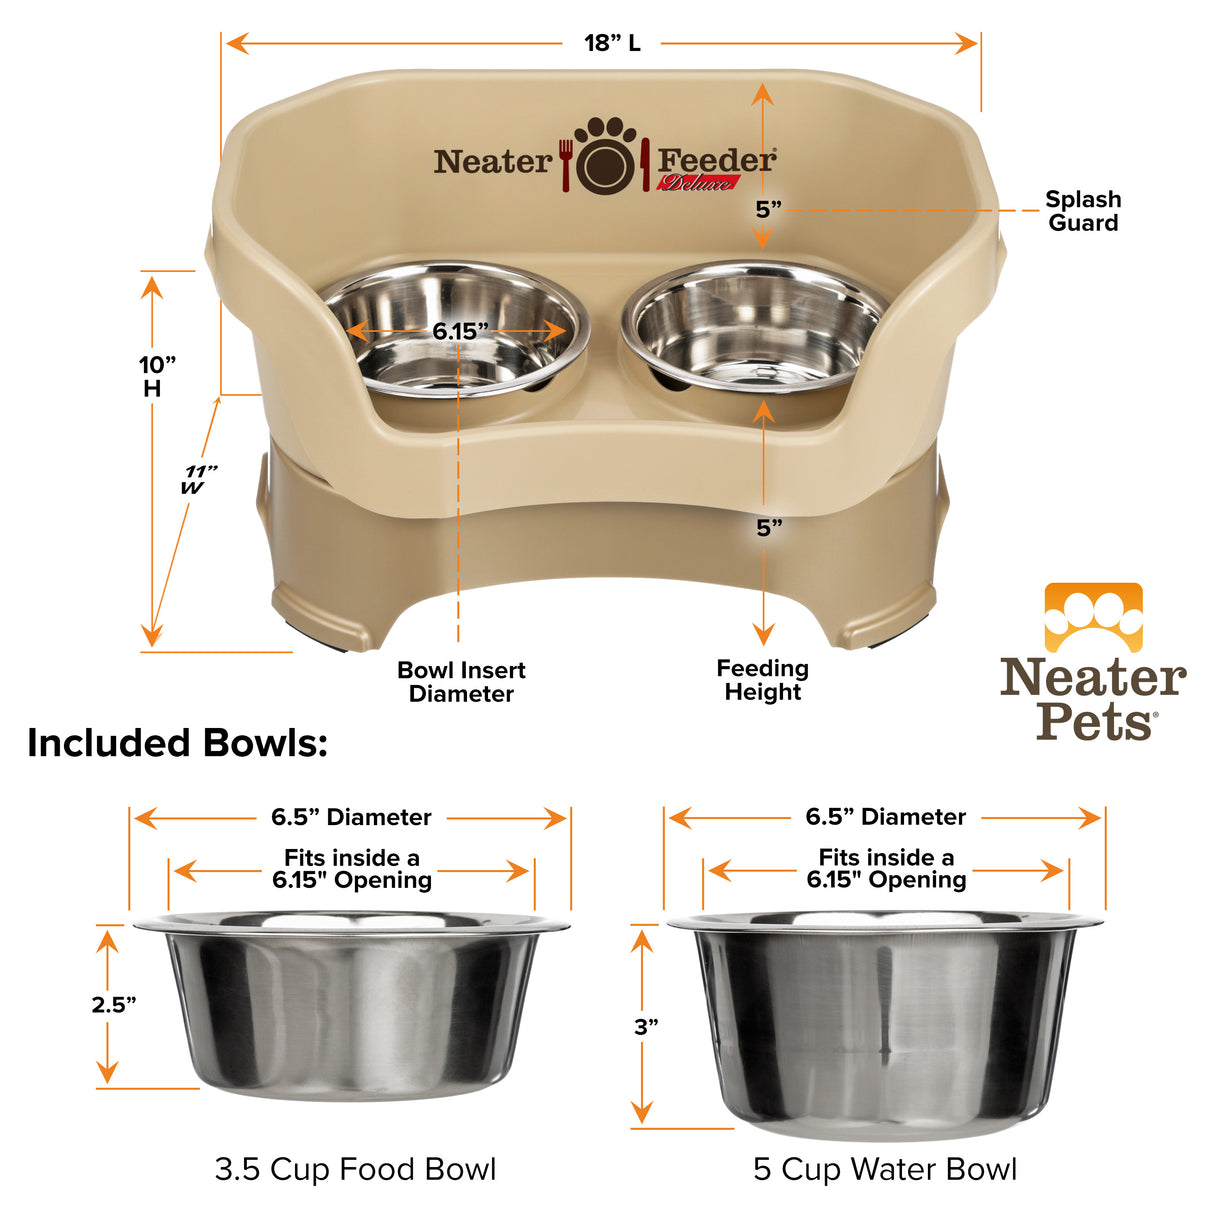 Deluxe medium feeder and bowl dimensions